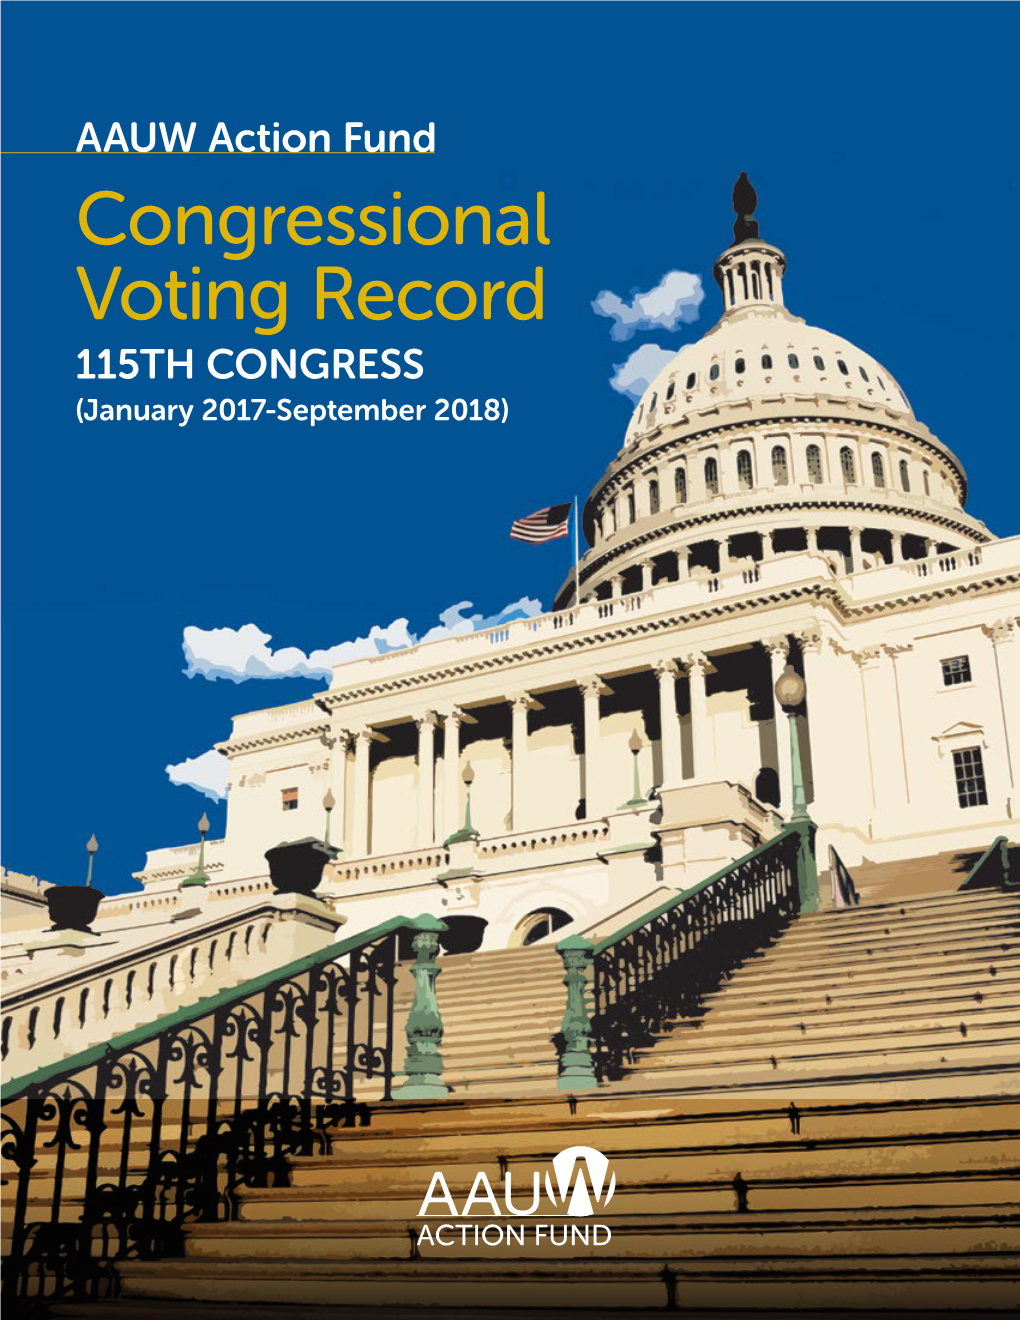 AAUW Action Fund Congressional Voting Record 115TH CONGRESS (January 2017-September 2018)